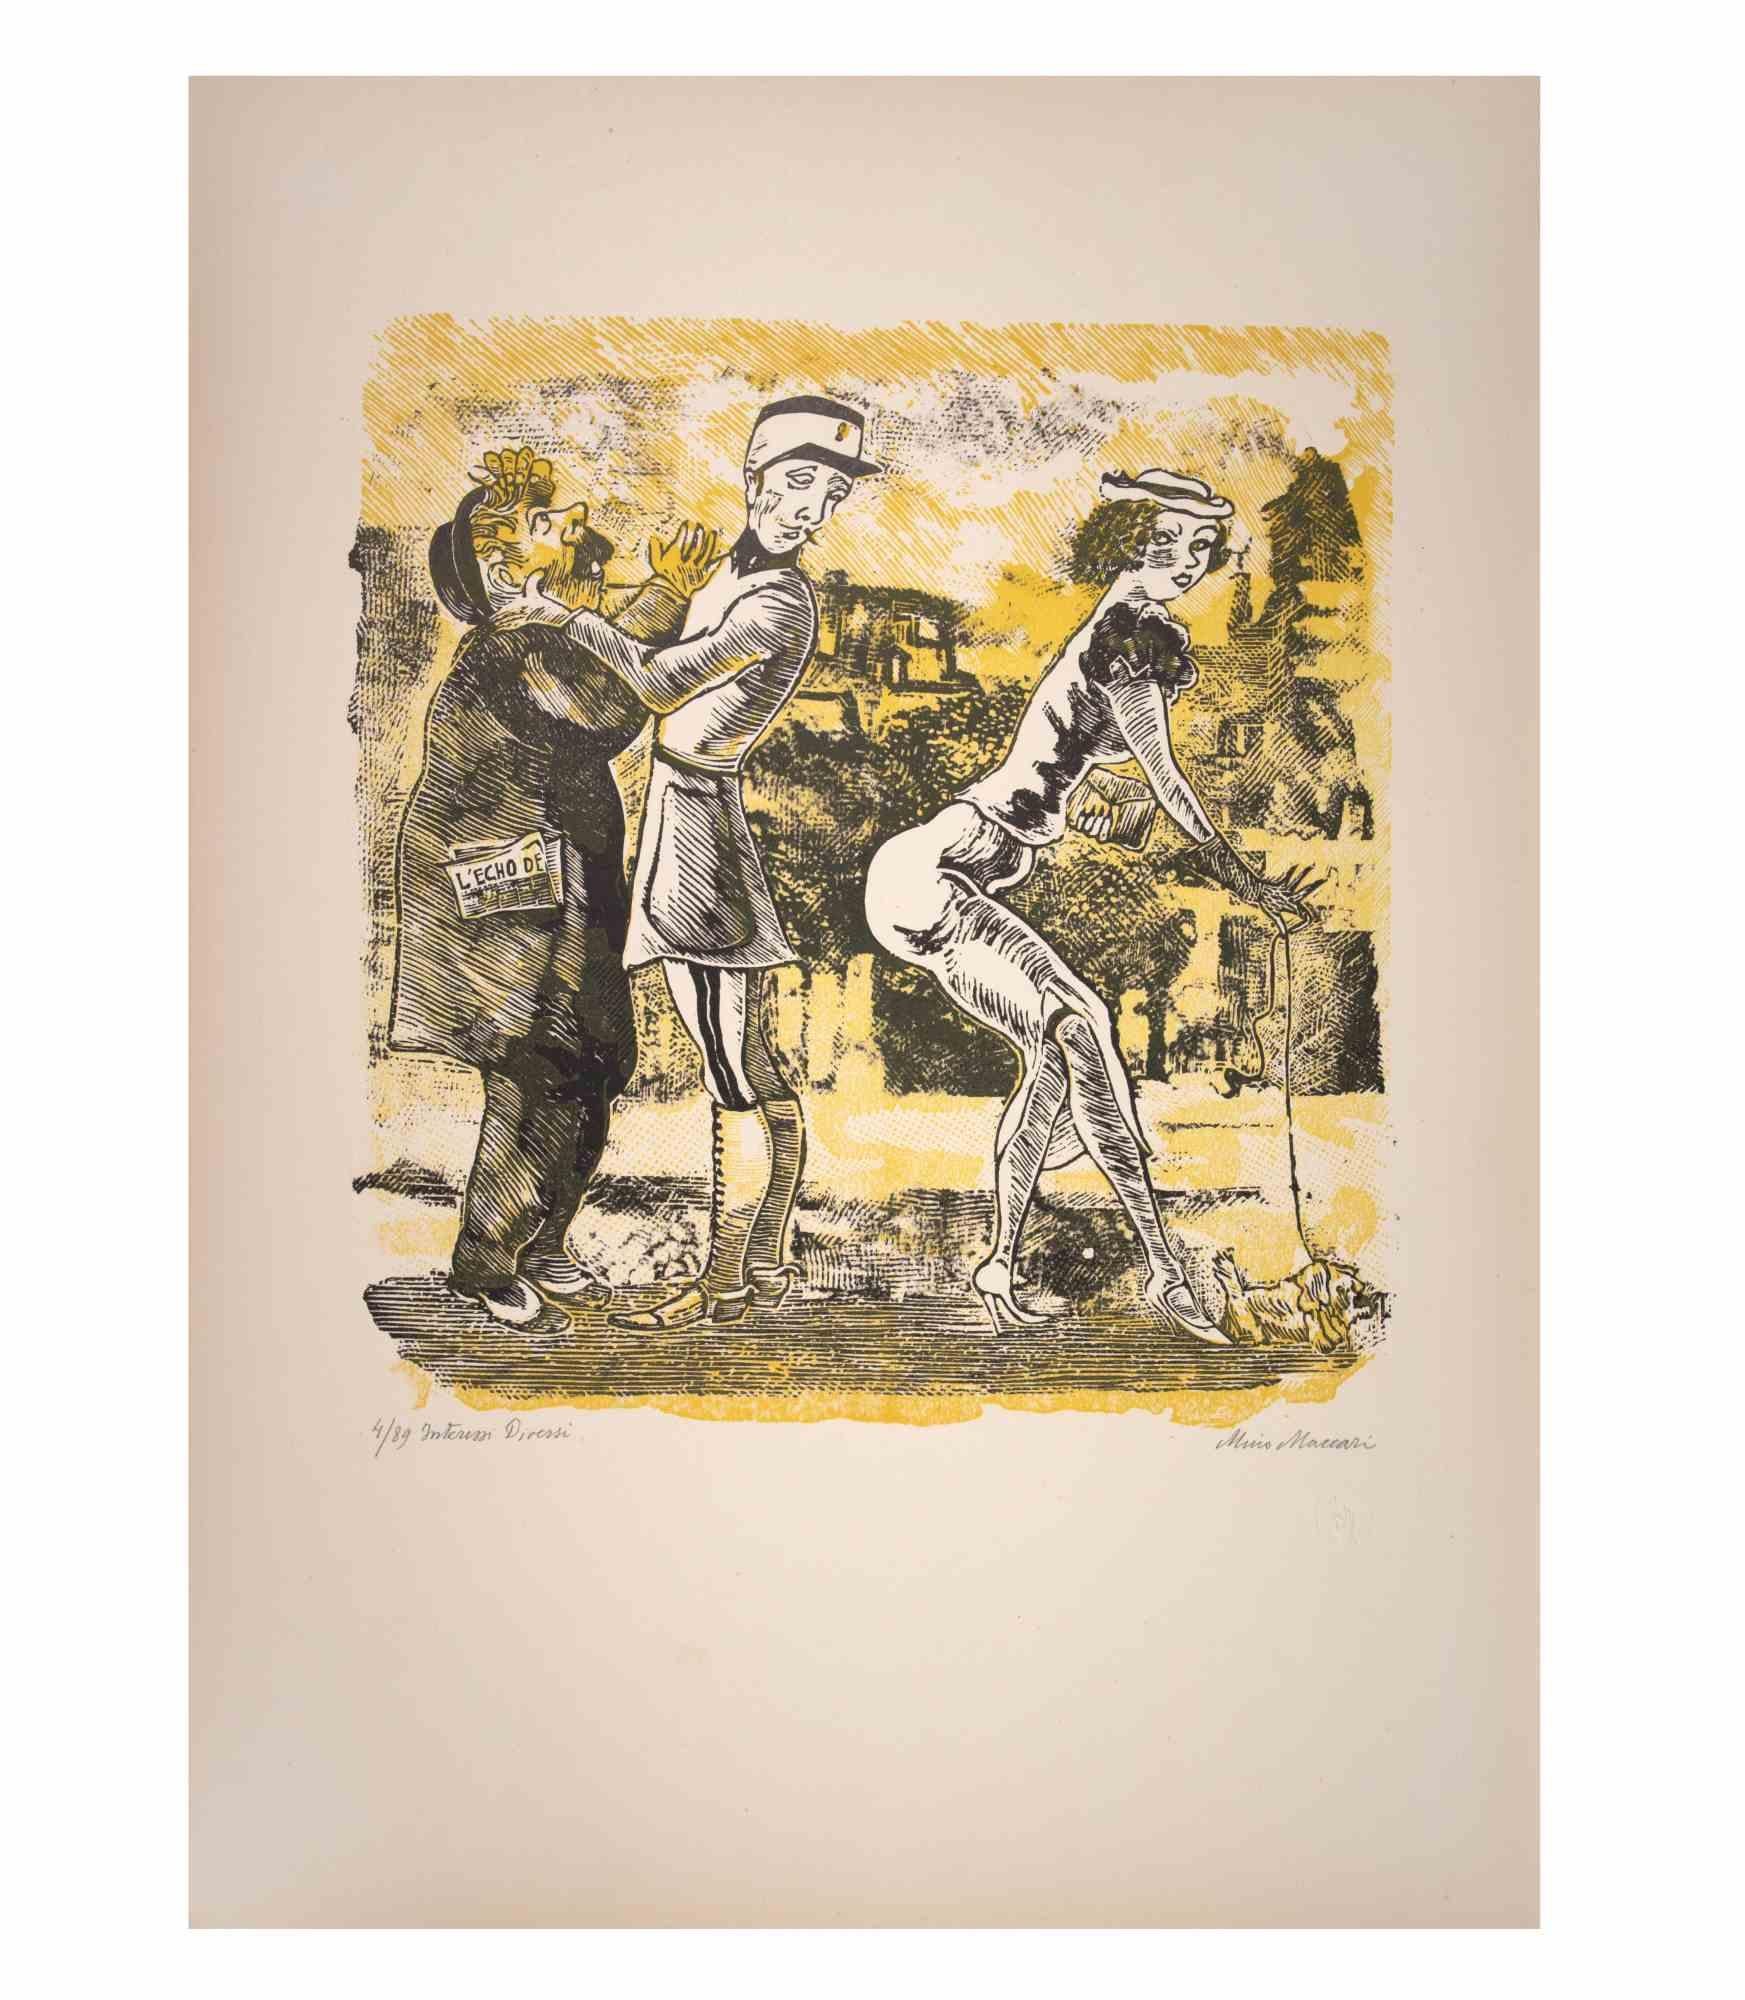  Different interests is an Artwork realized by Mino Maccari  (1924-1989) in the Mid-20th Century.

Colored woodcut on paper. Hand-signed on the lower, numbered 4/89 specimens and titled on the left margin.

Good conditions.

Mino Maccari (Siena,